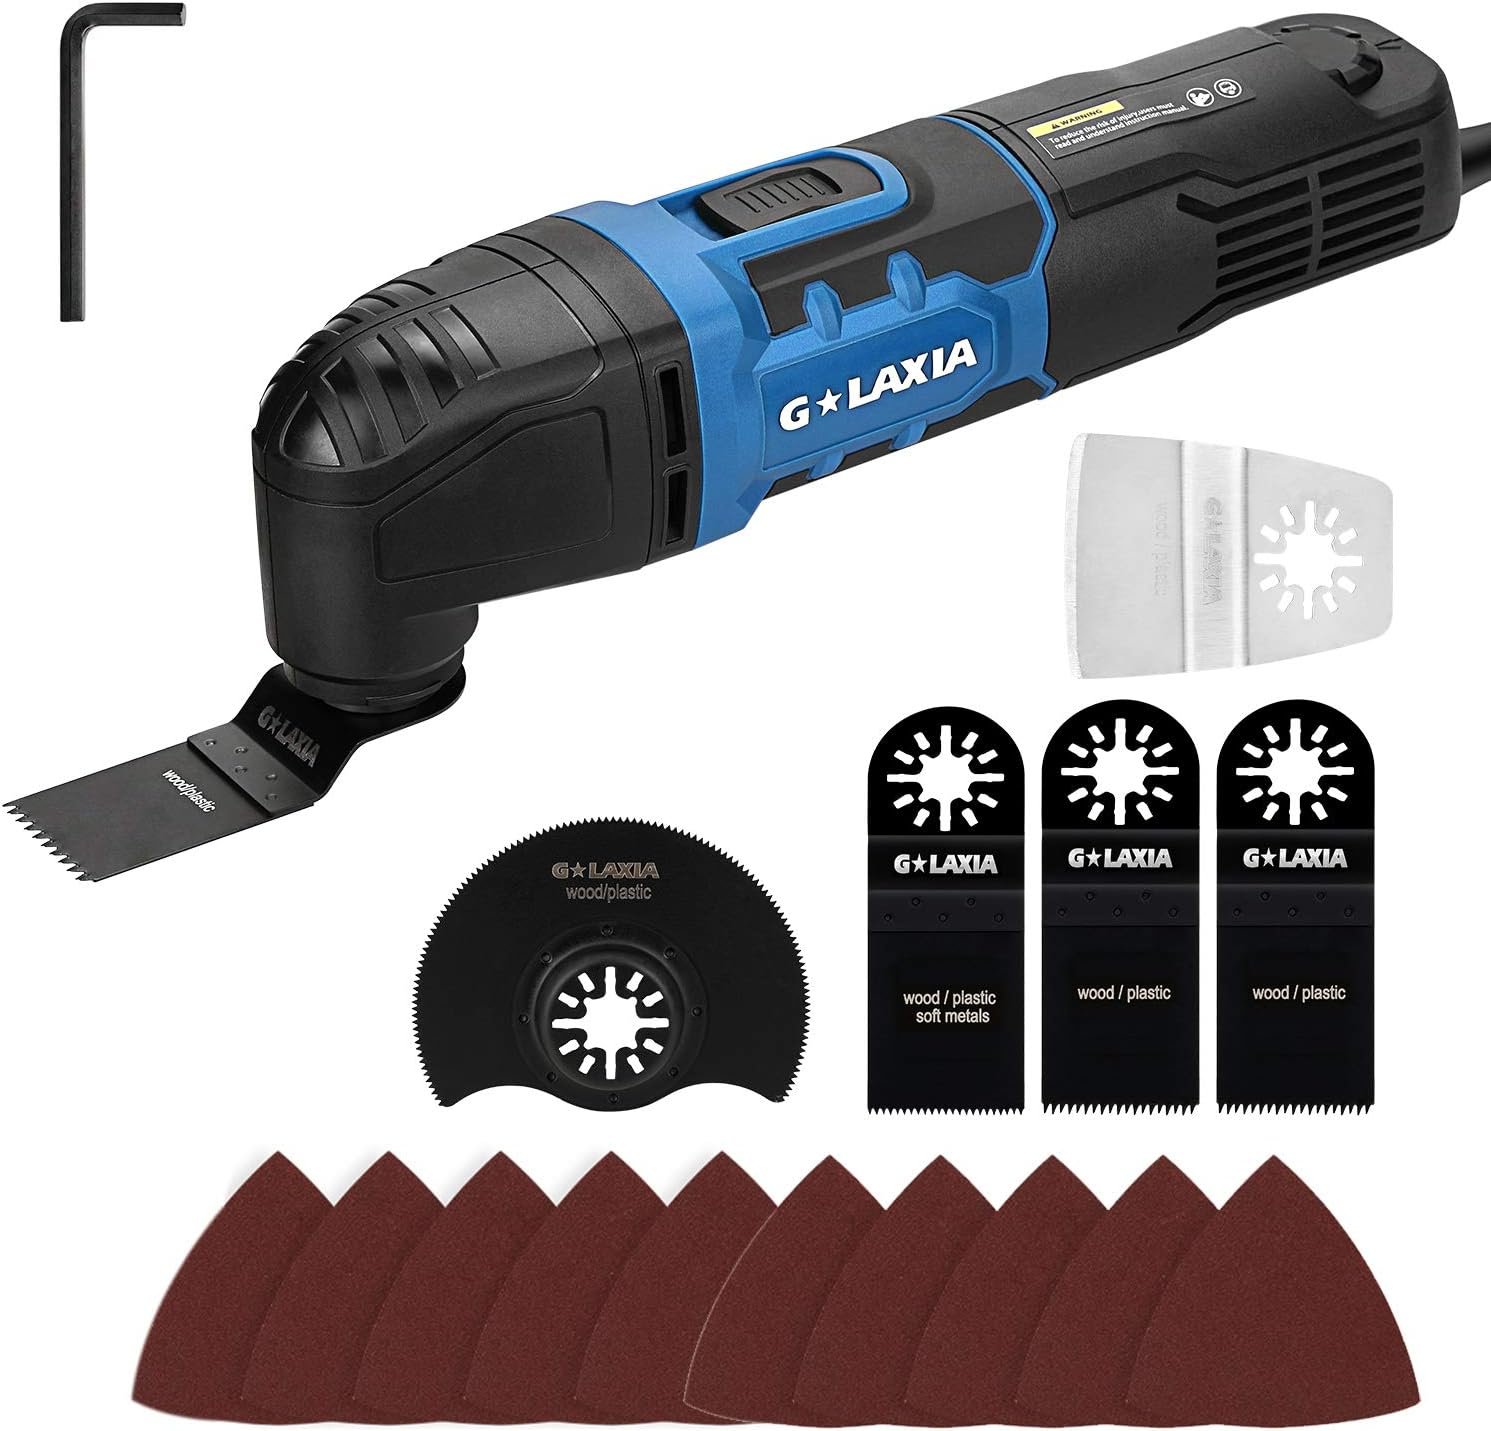 G LAXIA Oscillating Tool Review